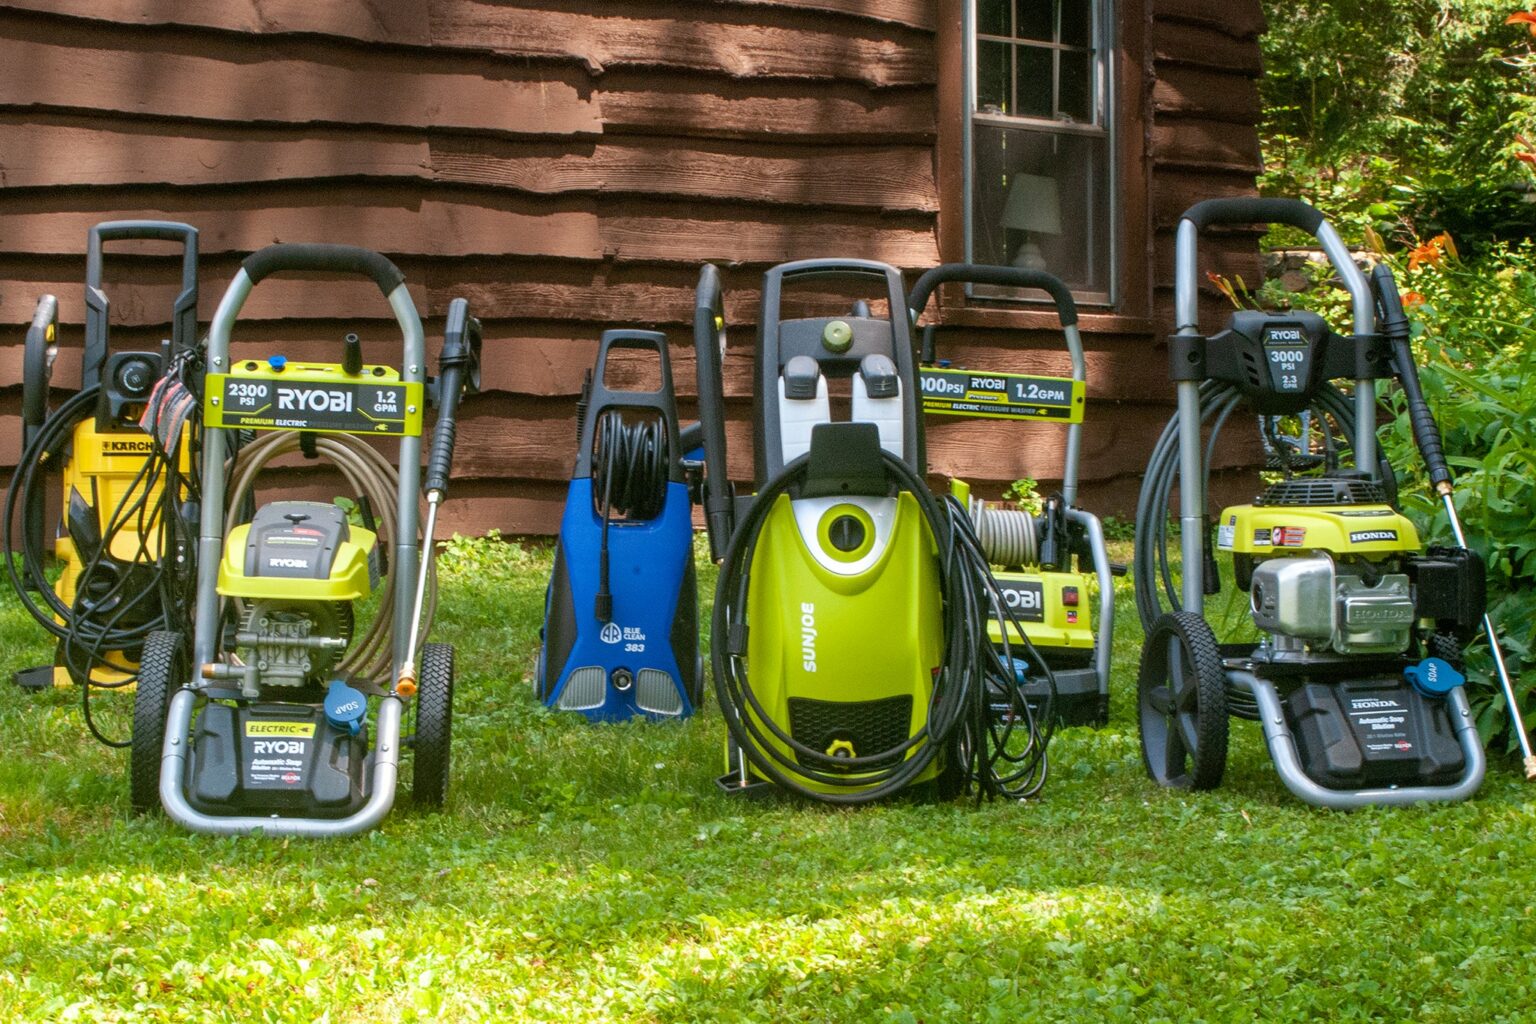 A Clear Guide to The 10 Best Electric Pressure/Power Washers in 2023